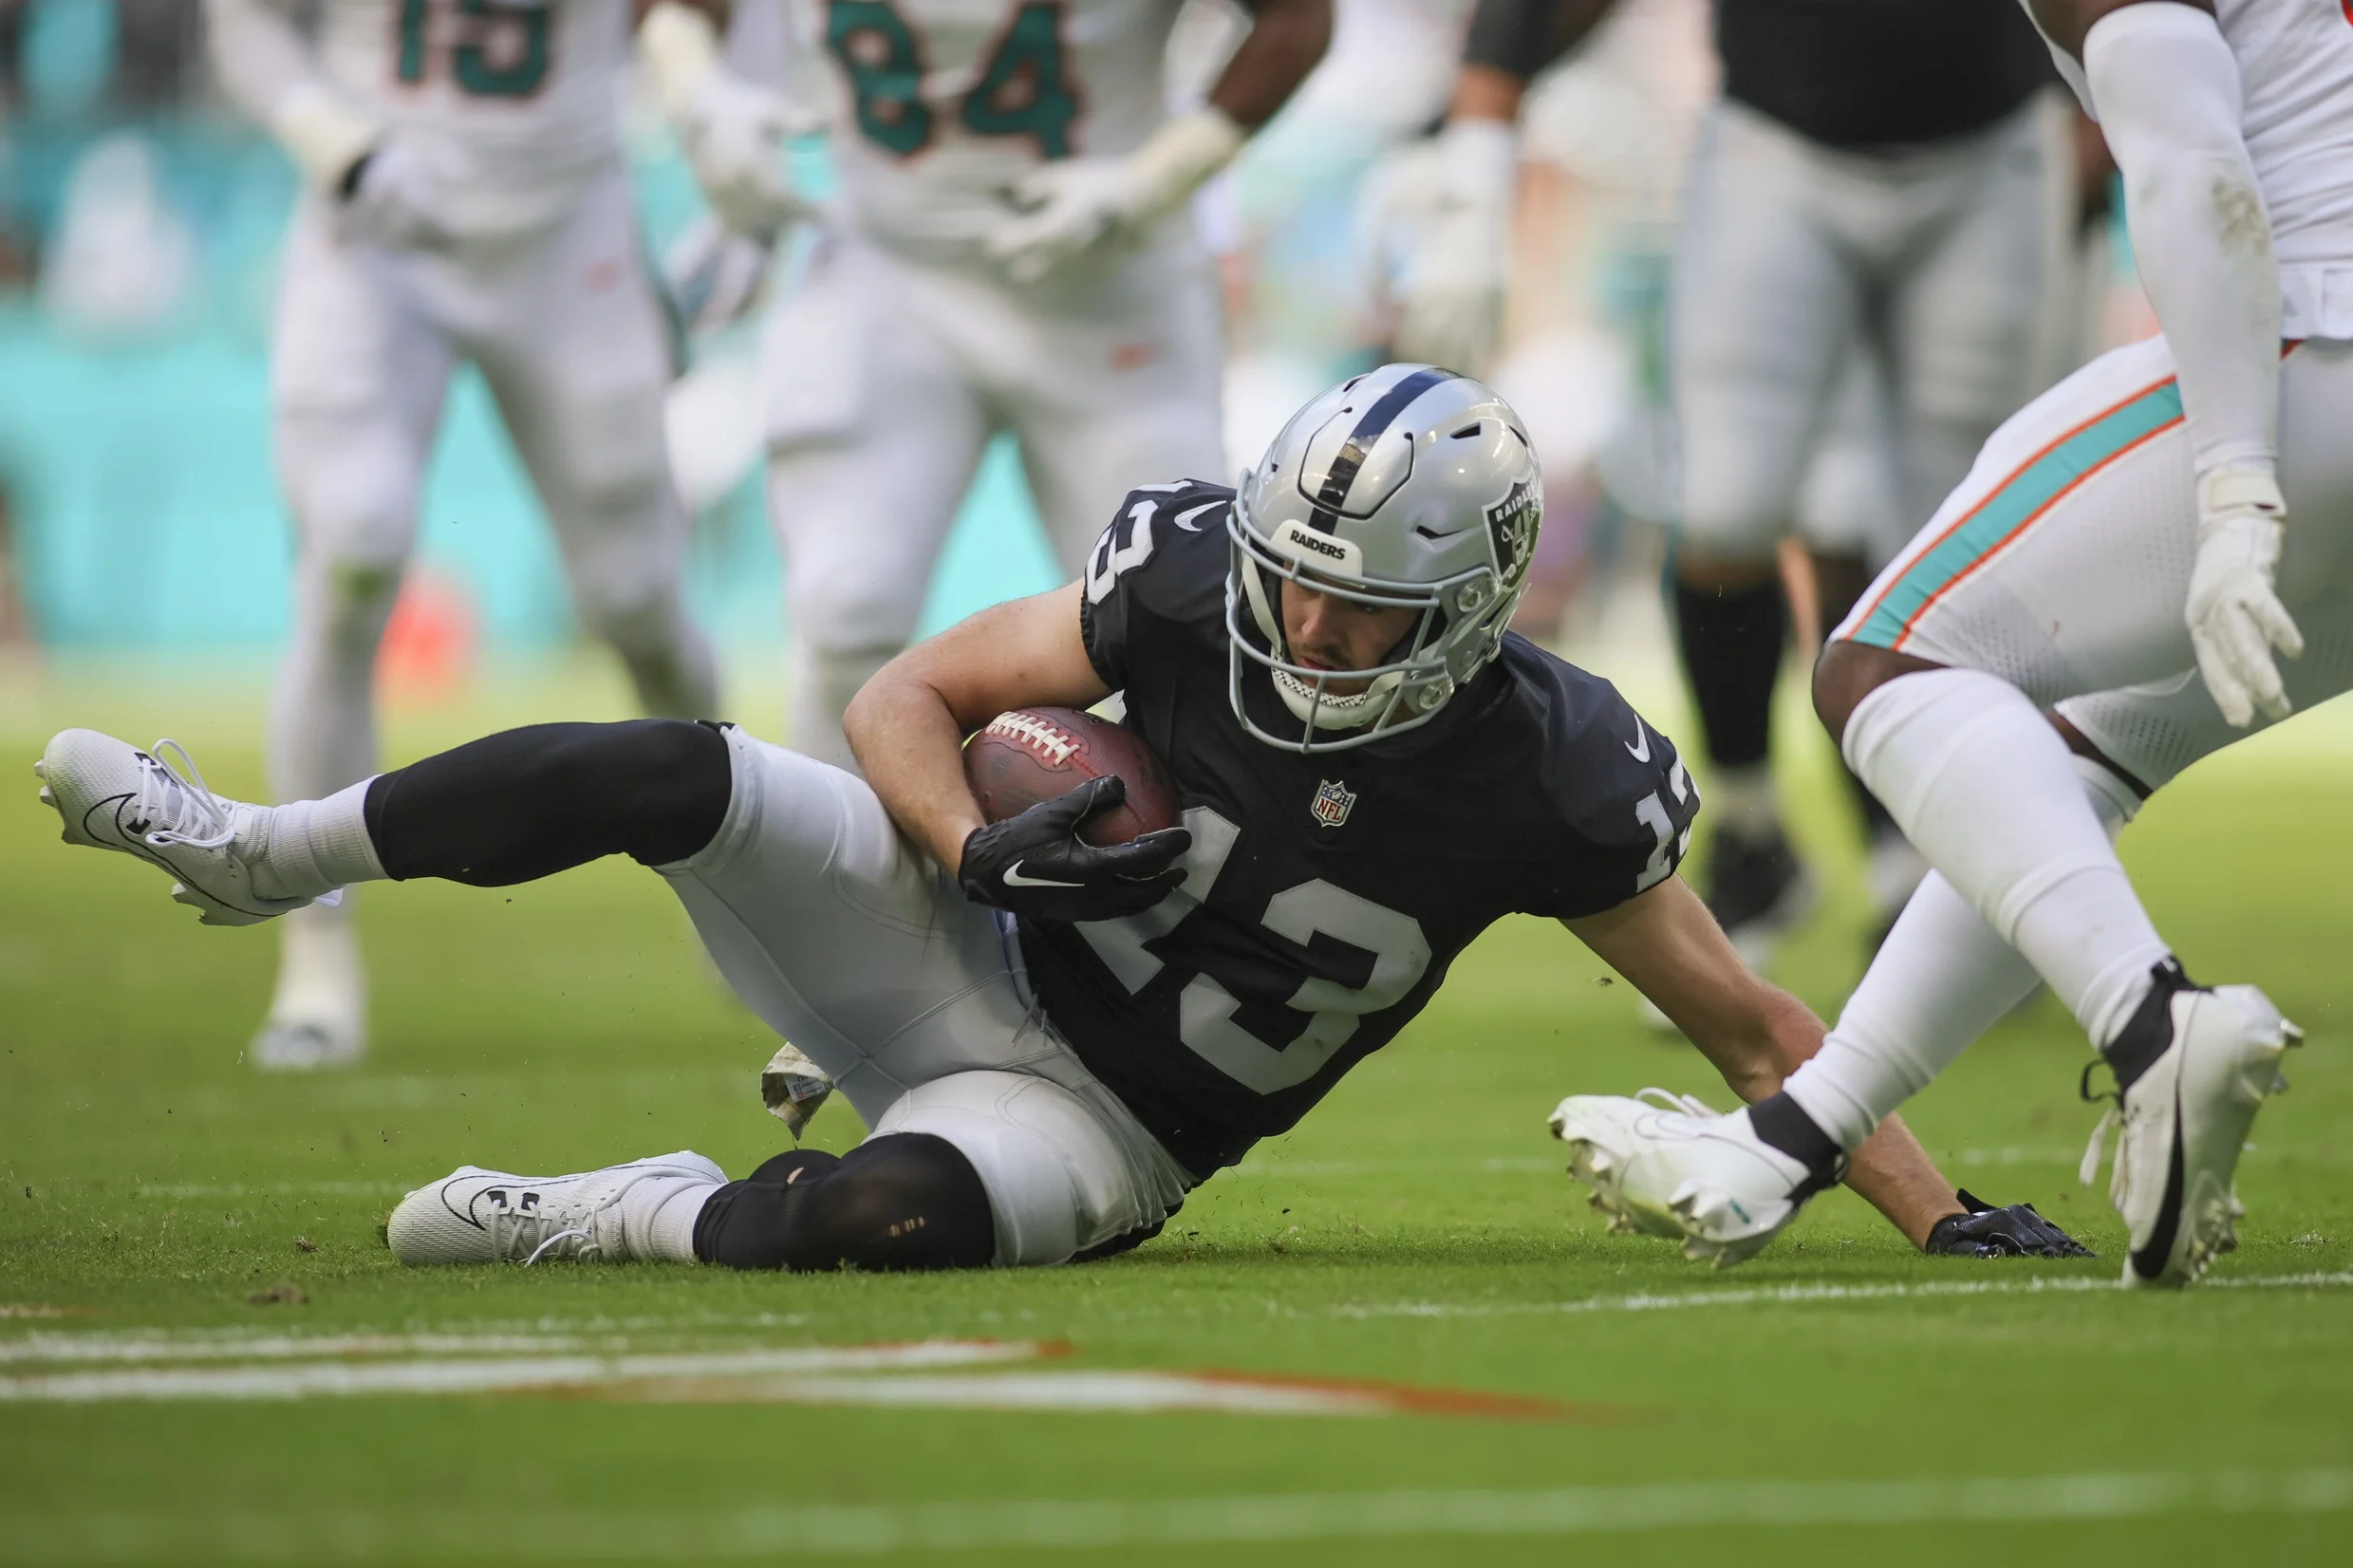 NFL News: Chicago Bears Eyeing Addition of Former Las Vegas Raiders’ Hunter Renfrow to Bolster Receiving Corps